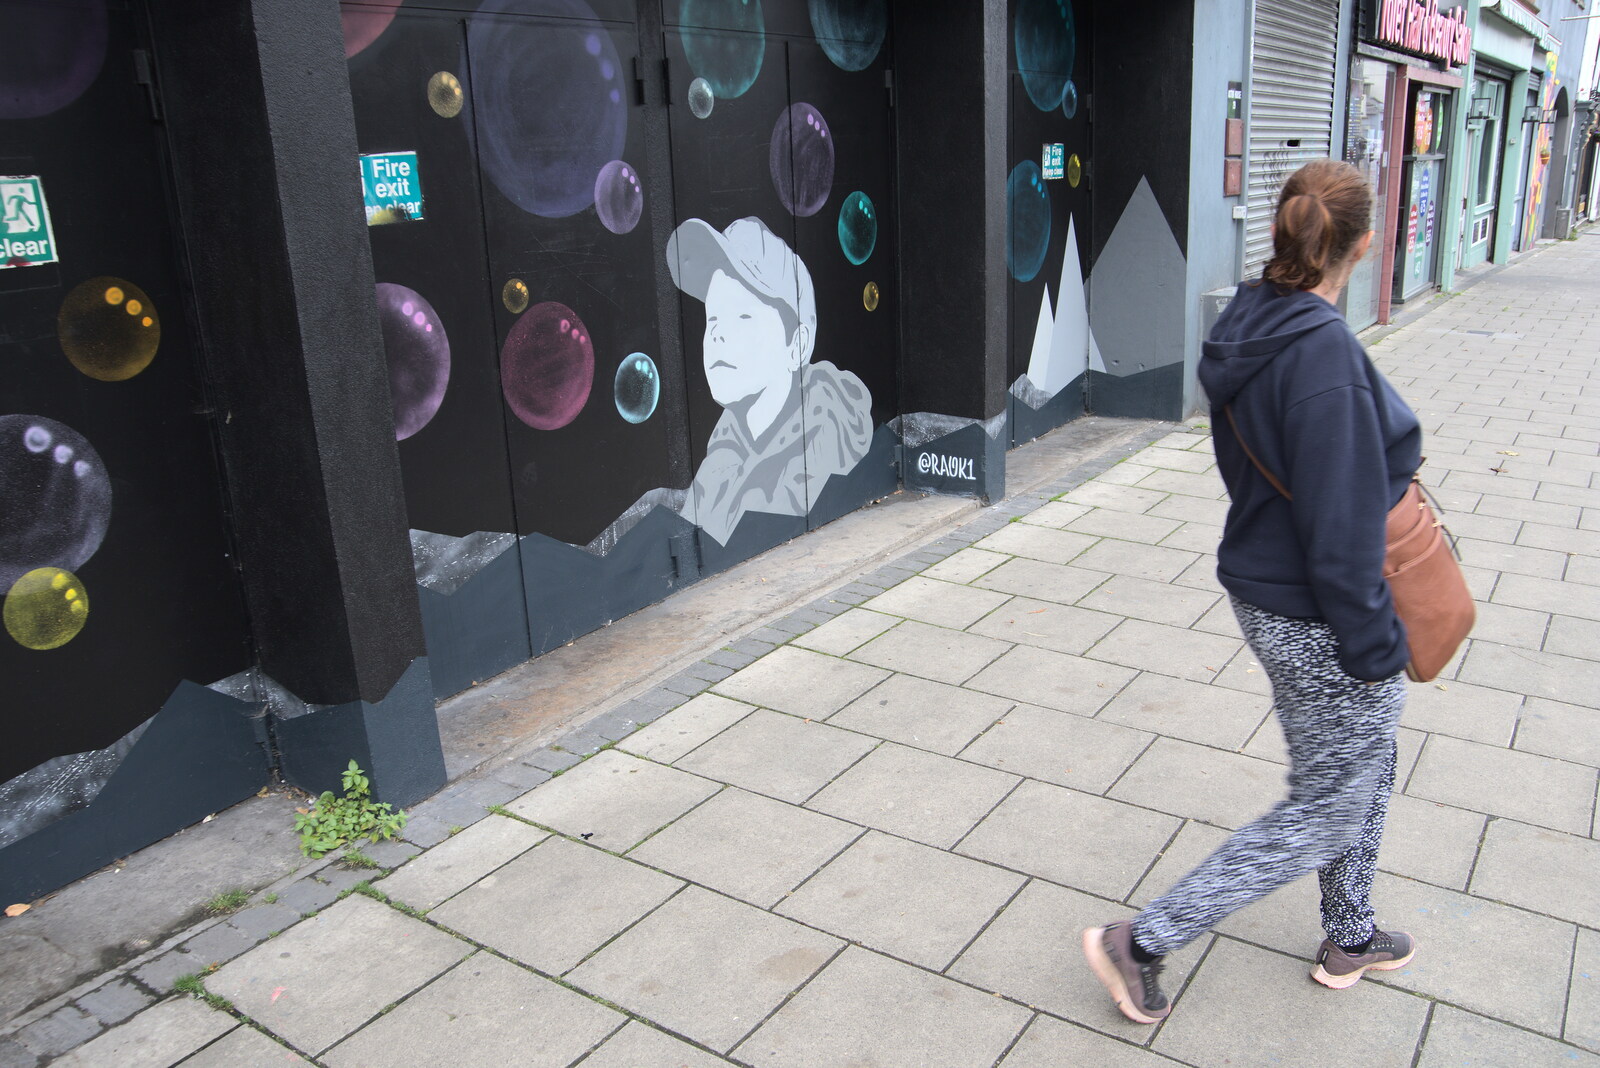 Isobel roams around on George's Street from Manorhamilton and the Street Art of Dún Laoghaire, Ireland - 15th August 2021